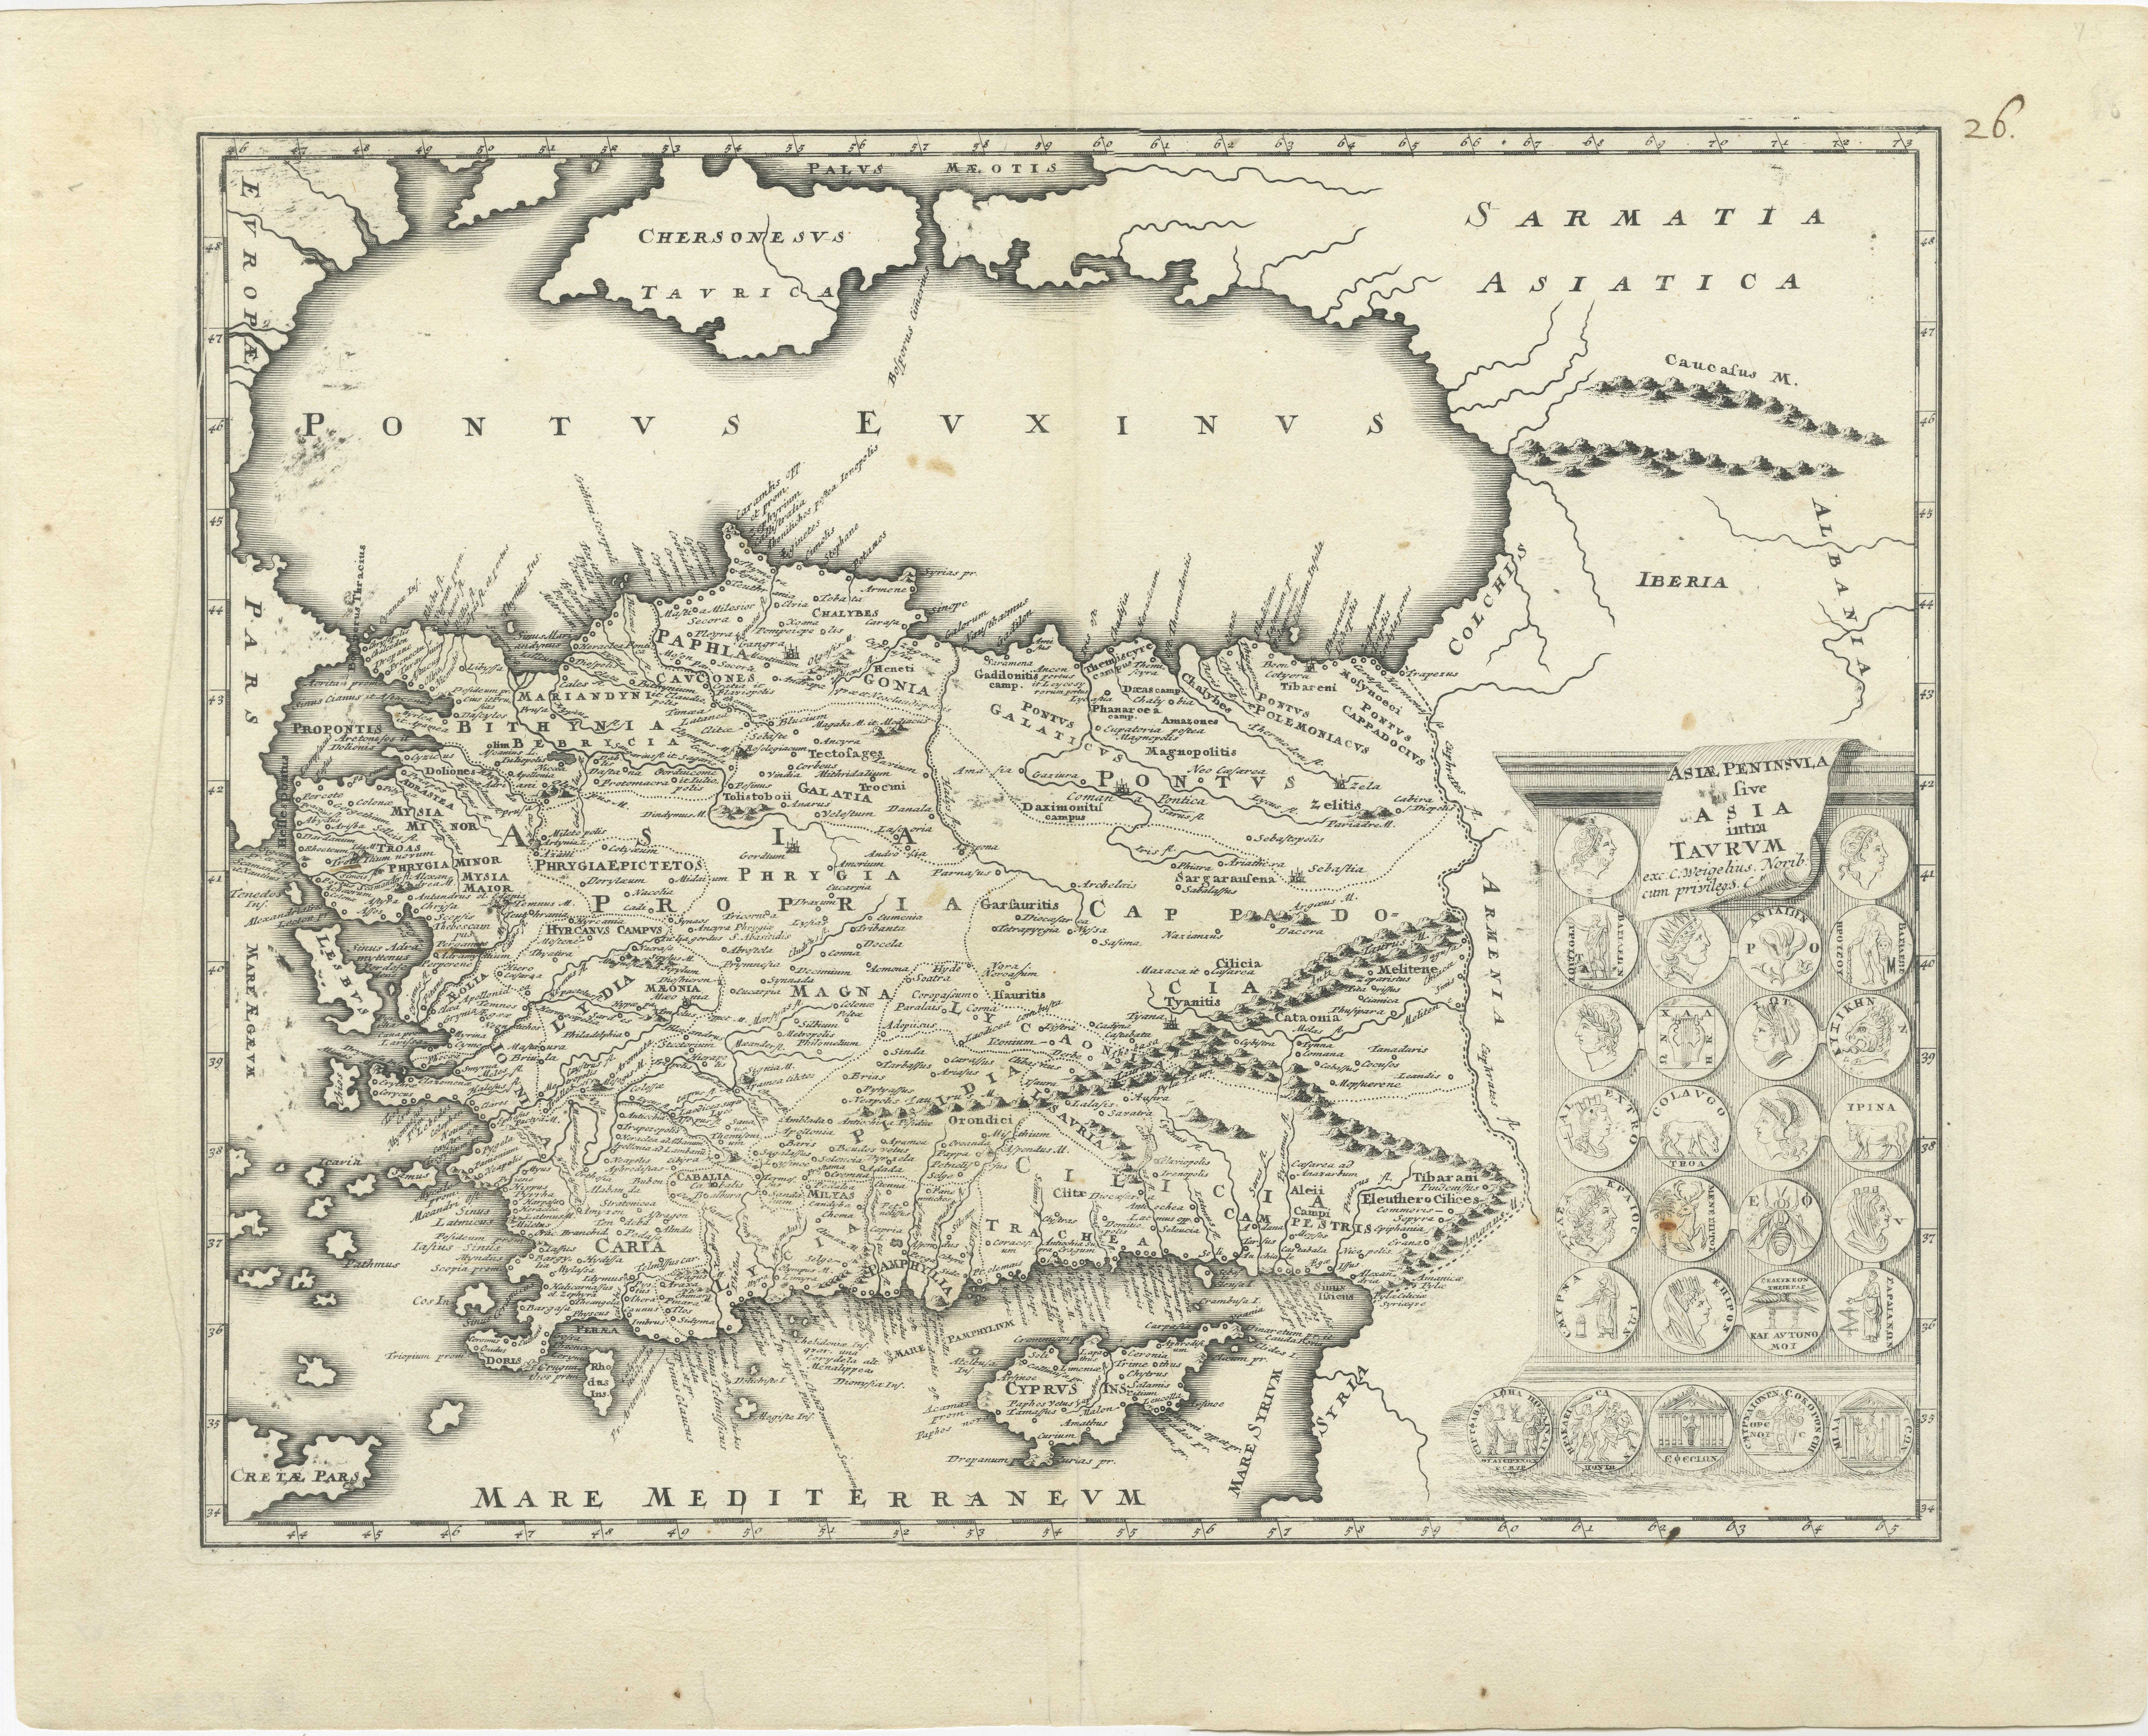 Antique map titled 'Asiae Peninsula sive Asia intra Taurum'. Decorative map of Cyprus and Asia Minor, featuring the geographical features known to the ancients and decorated with a vignettes and 27 medallions. Published by Christoph Weigel, circa